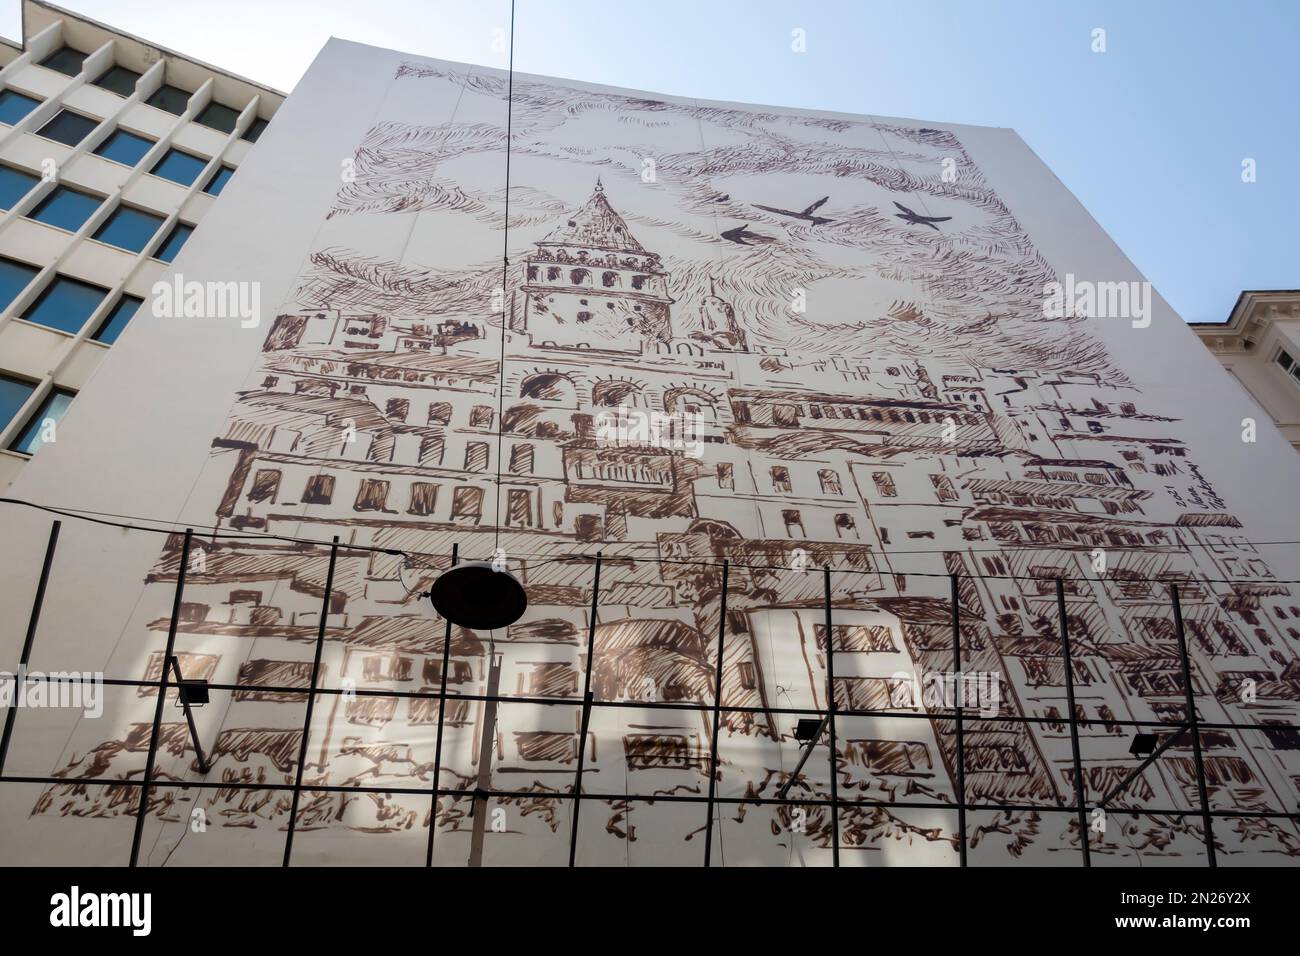 Facade mural artwork depicting historic Galata tower district on  the building in Karakoy Istanbul Turkey Stock Photo